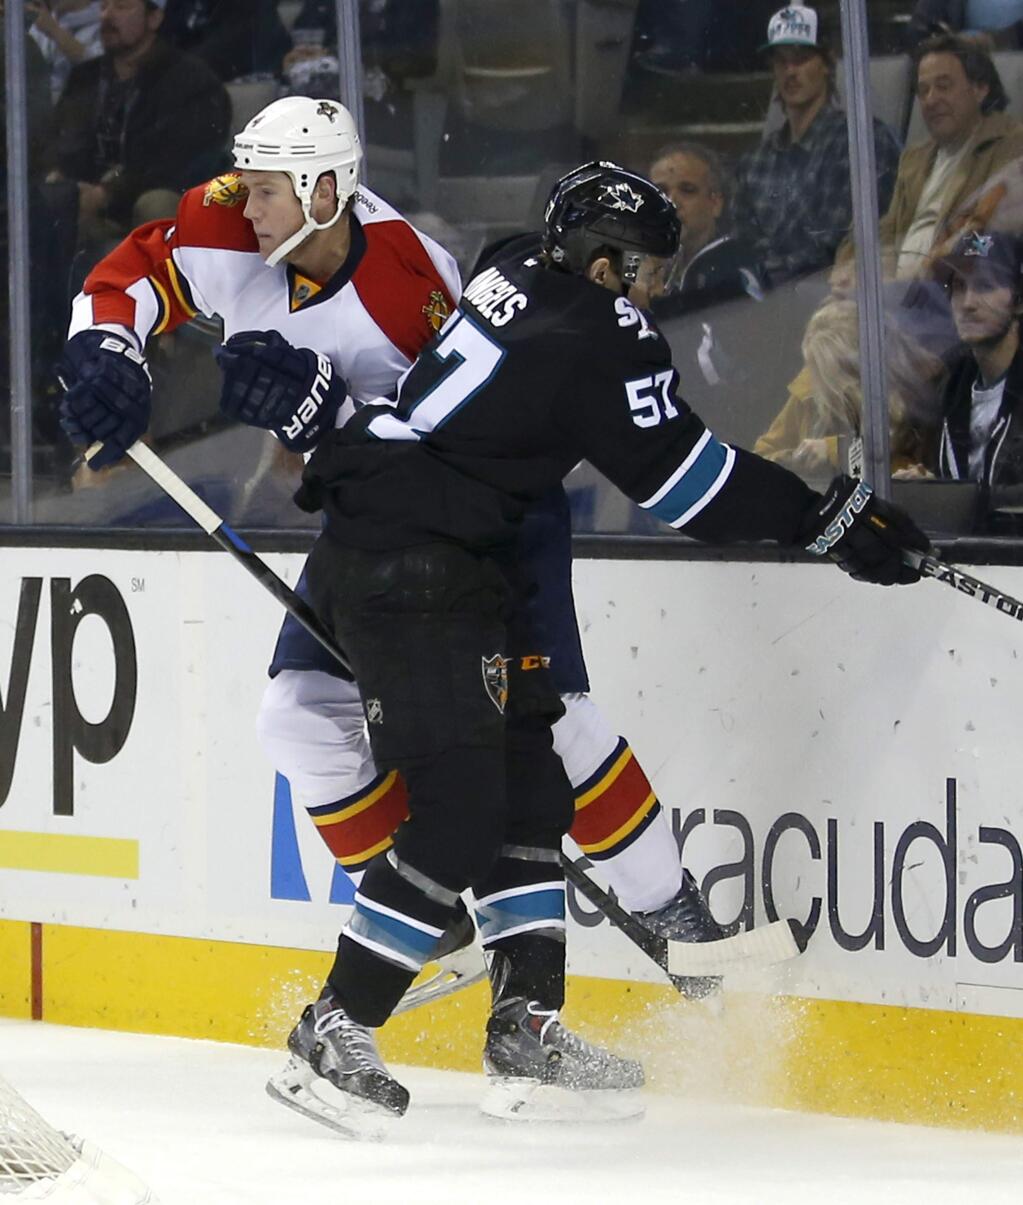 Florida Panthers defenseman Dylan Olsen (4) is checked into the boards by San Jose Sharks center Tommy Wingels (57) during the first period of an NHL hockey game Thursday, Nov. 20, 2014, in San Jose, Calif. (AP Photo/Tony Avelar)